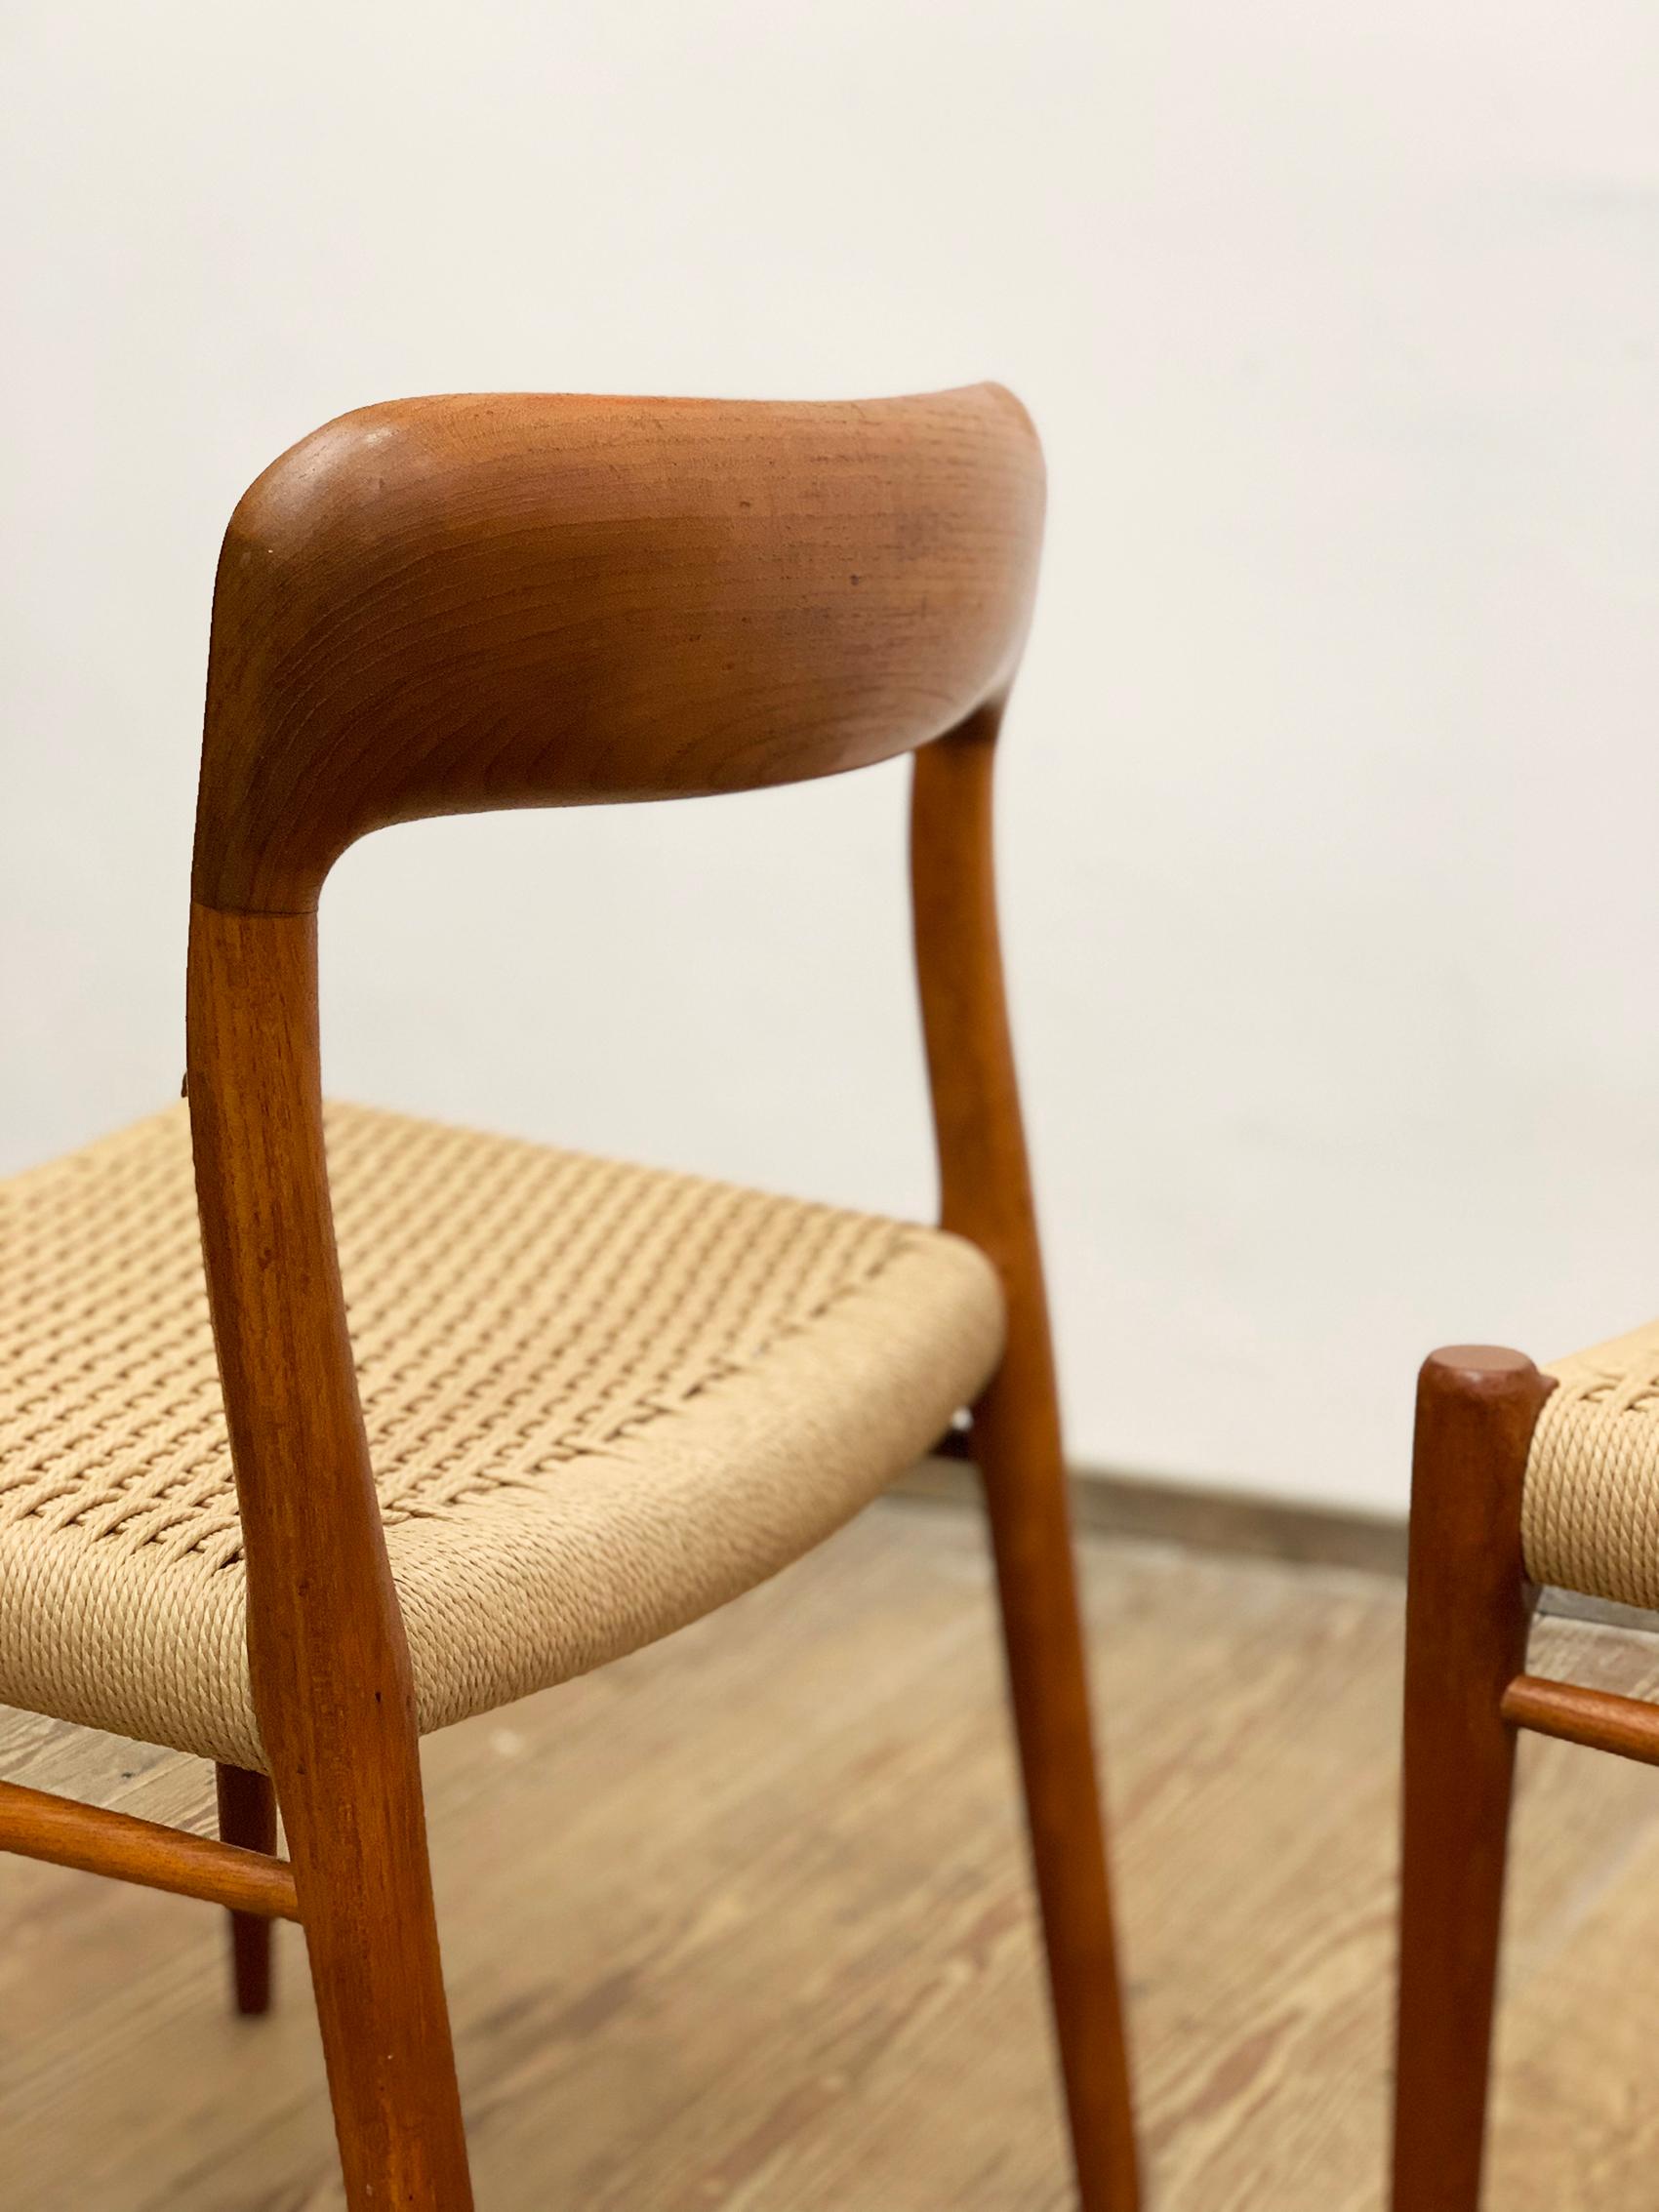 Papercord Midcentury Teak Dining Chairs #75 by Niels O. Møller for J. L. Moller, Set of 4 For Sale